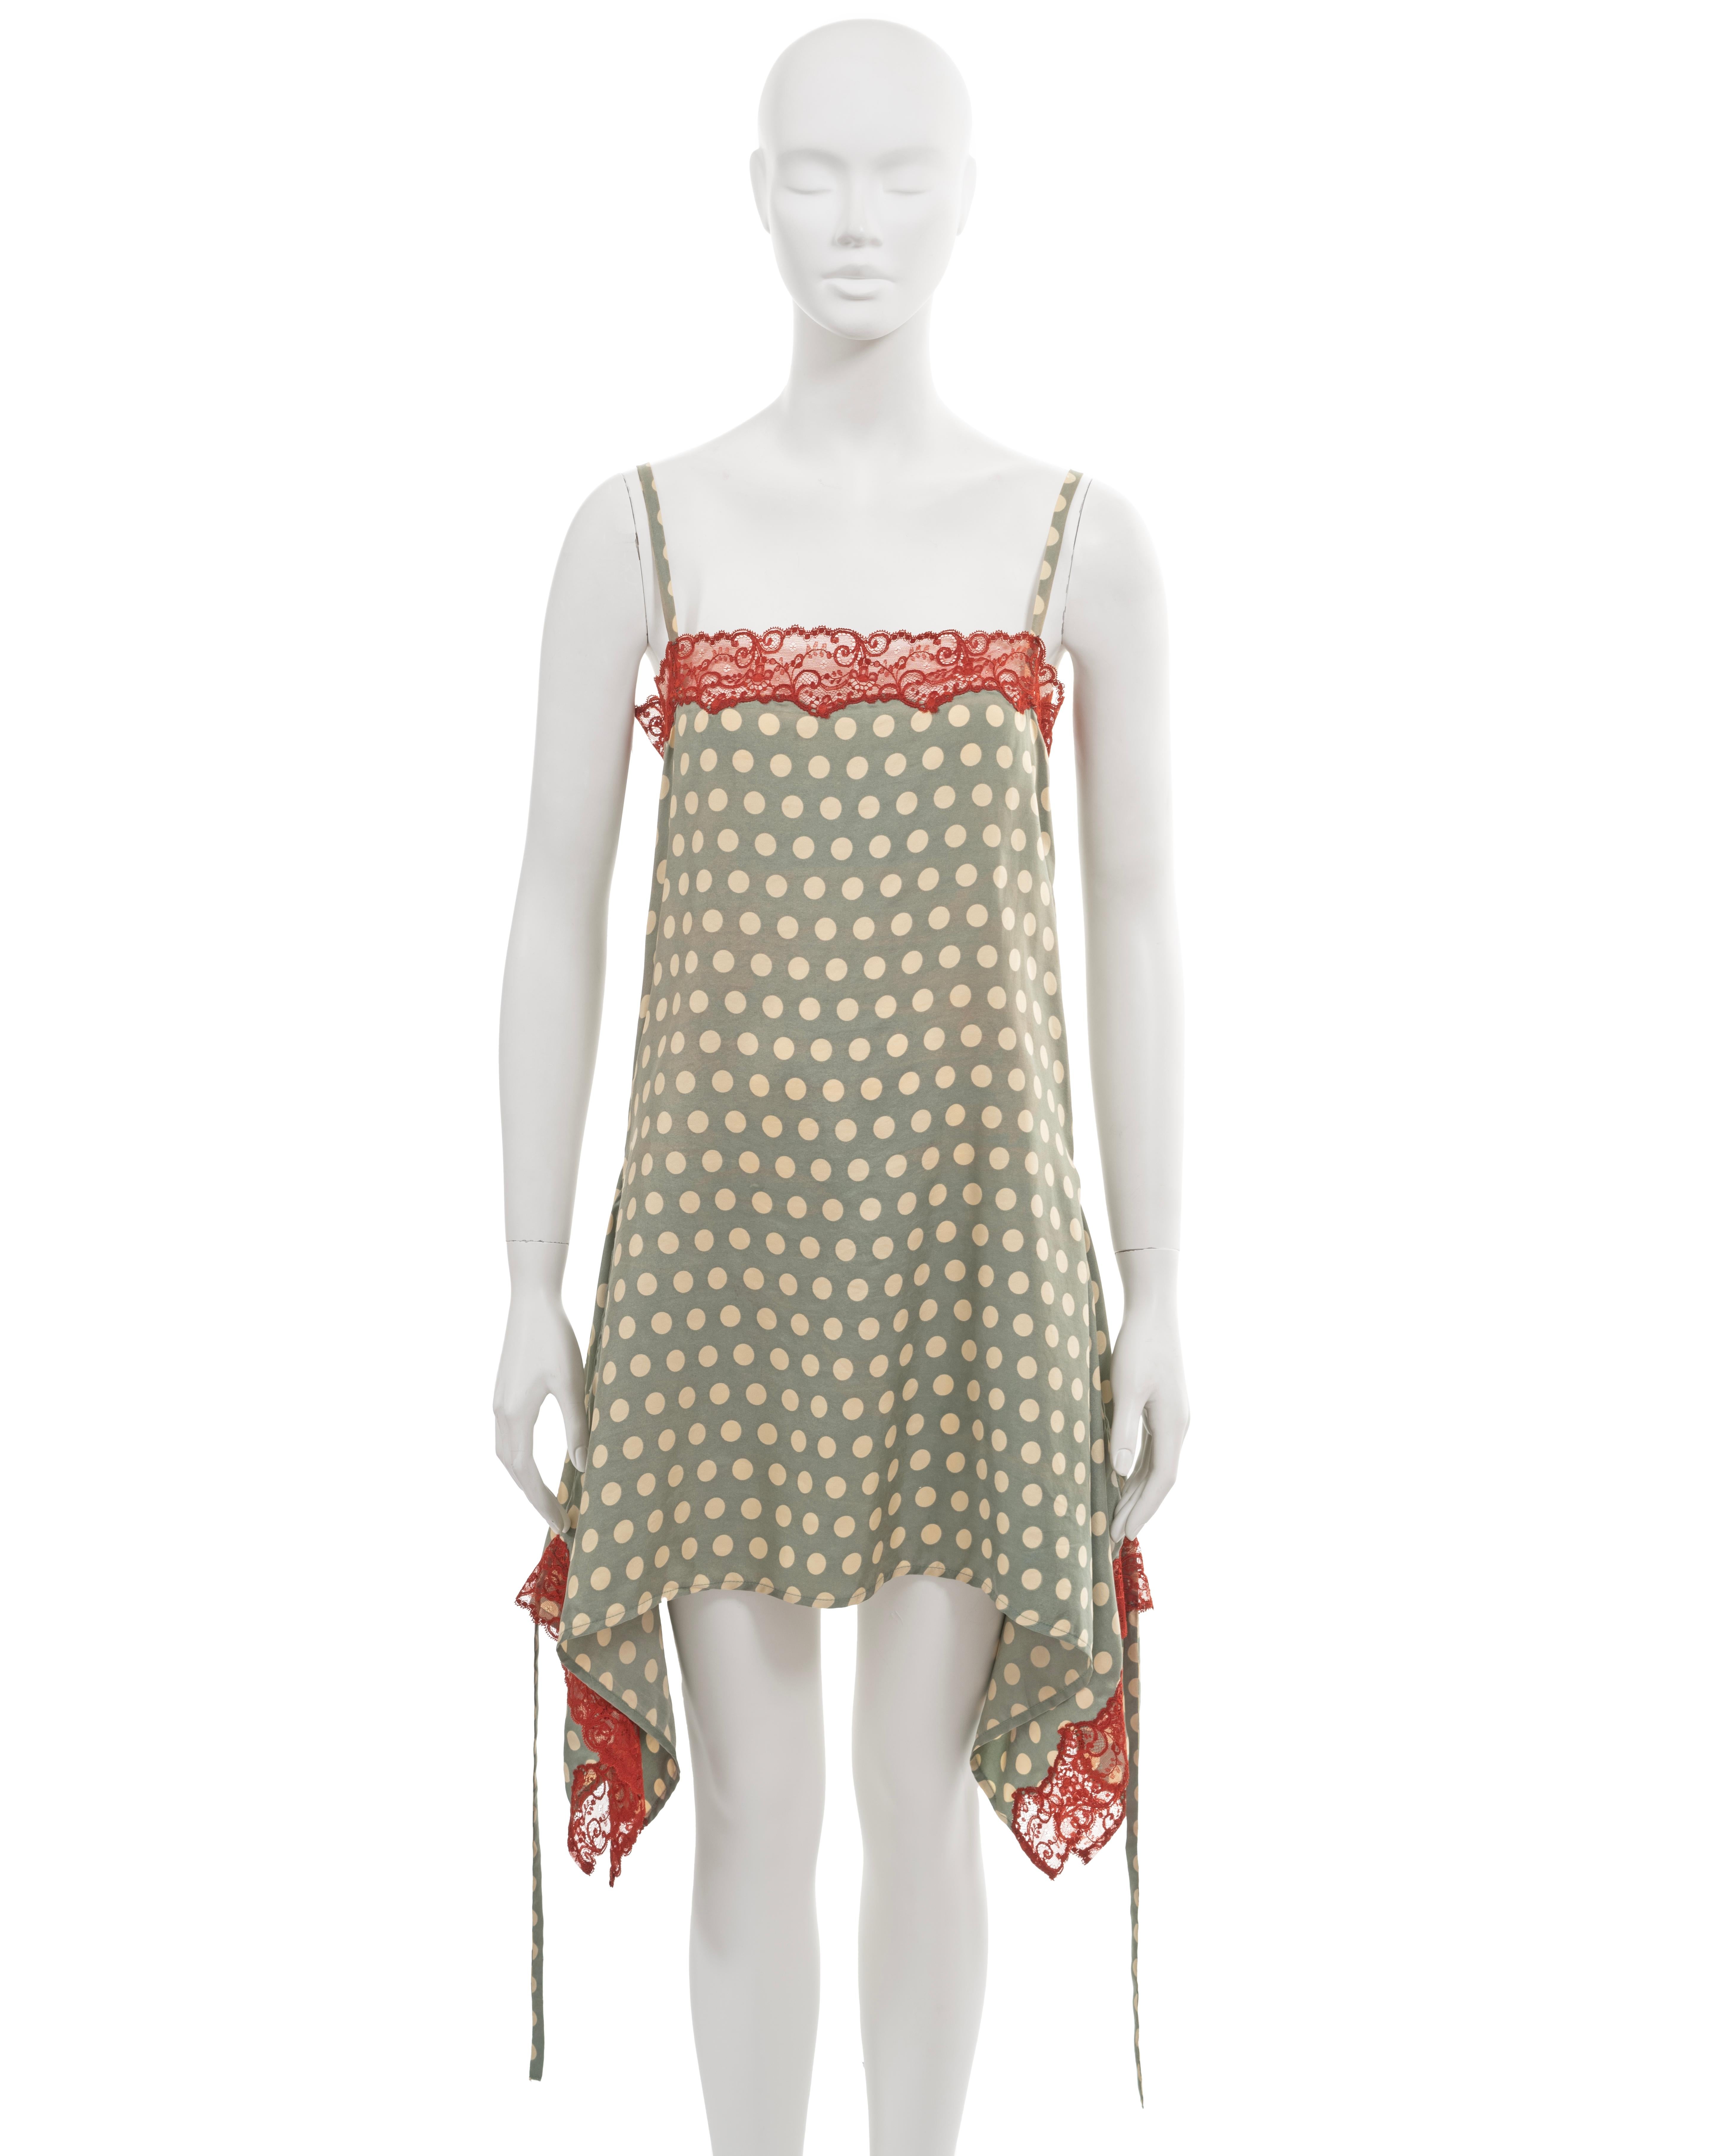 ▪ Archival Jean Paul Gaultier slip dress
▪ Spring-Summer 1992
▪ Sage green silk with allover ivory polkadot motif
▪ Red lace trim featured on the neck and hemline
▪ The skirt has wider panels on the hips, that can be fastened with ties at the back